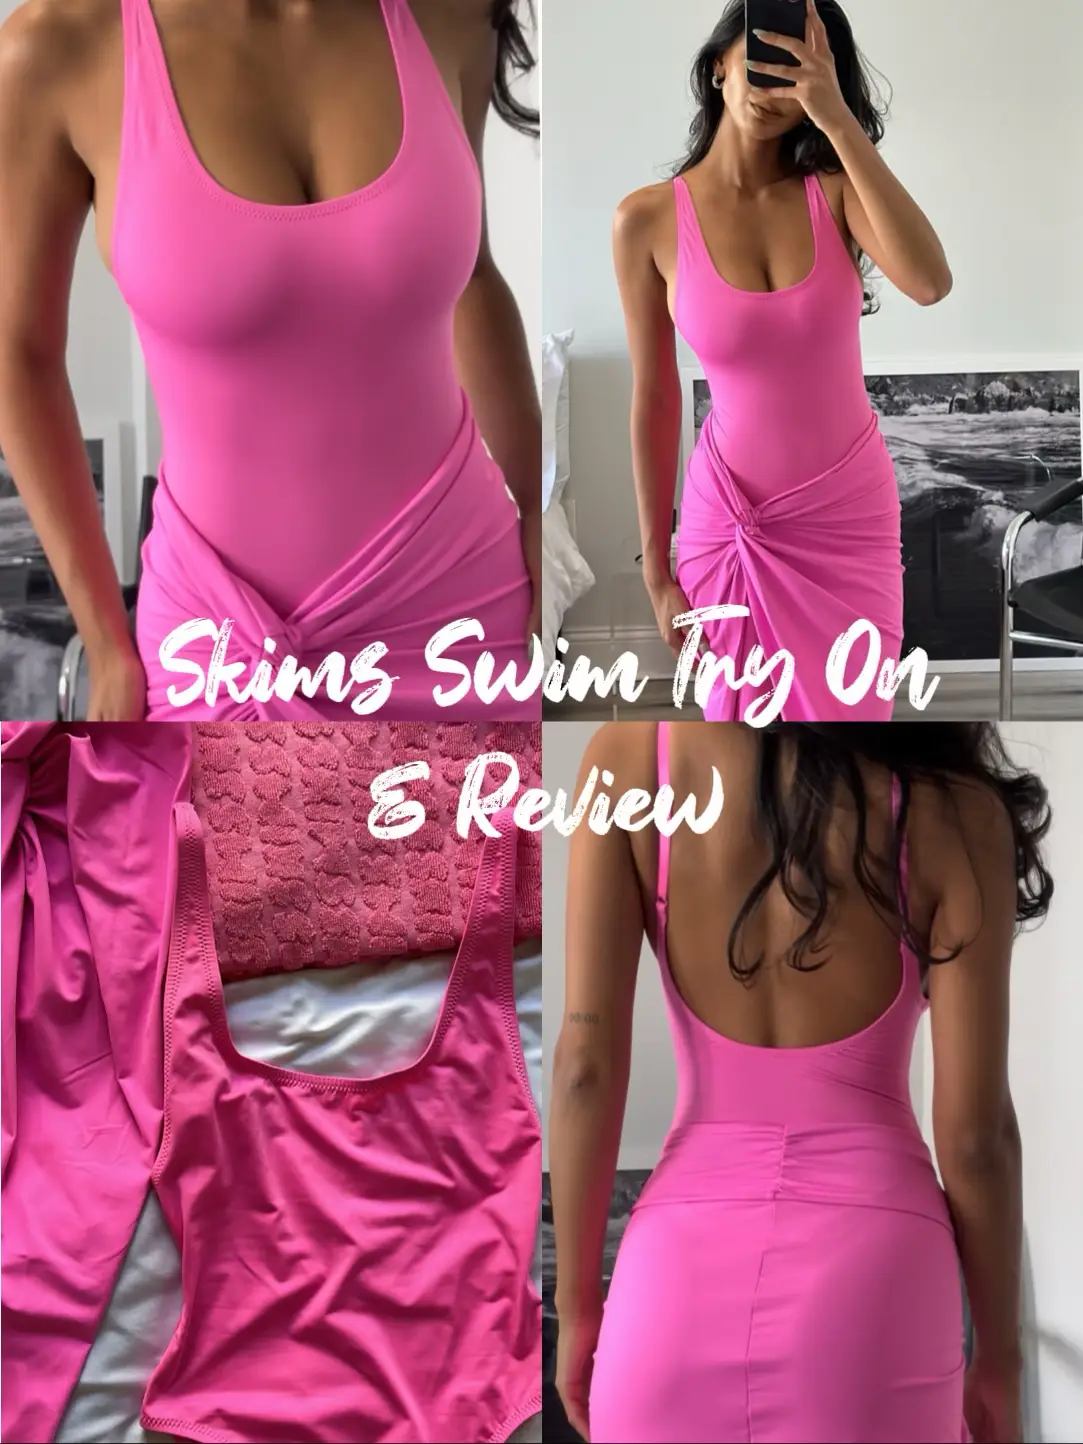 SKIMS SWIM Try On Haul - Is It Worth it? (Honest Review) 